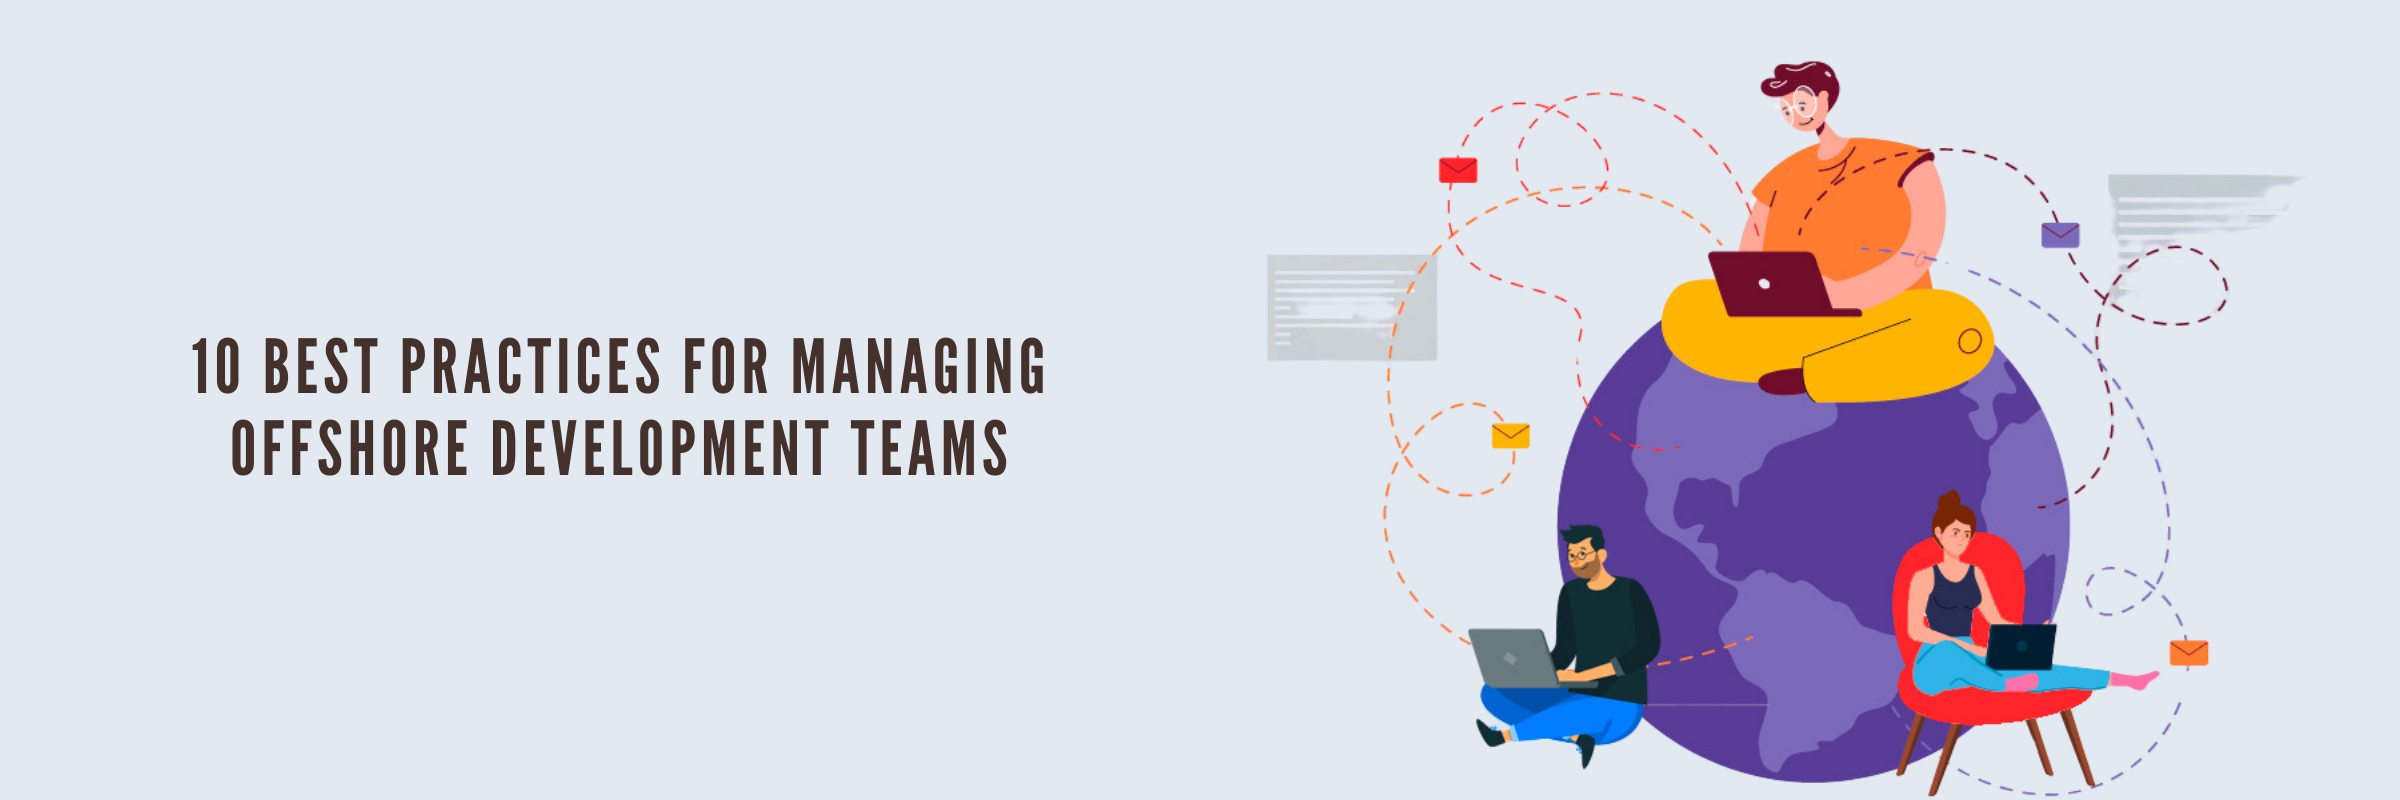 10 Best practices for managing offshore development teams